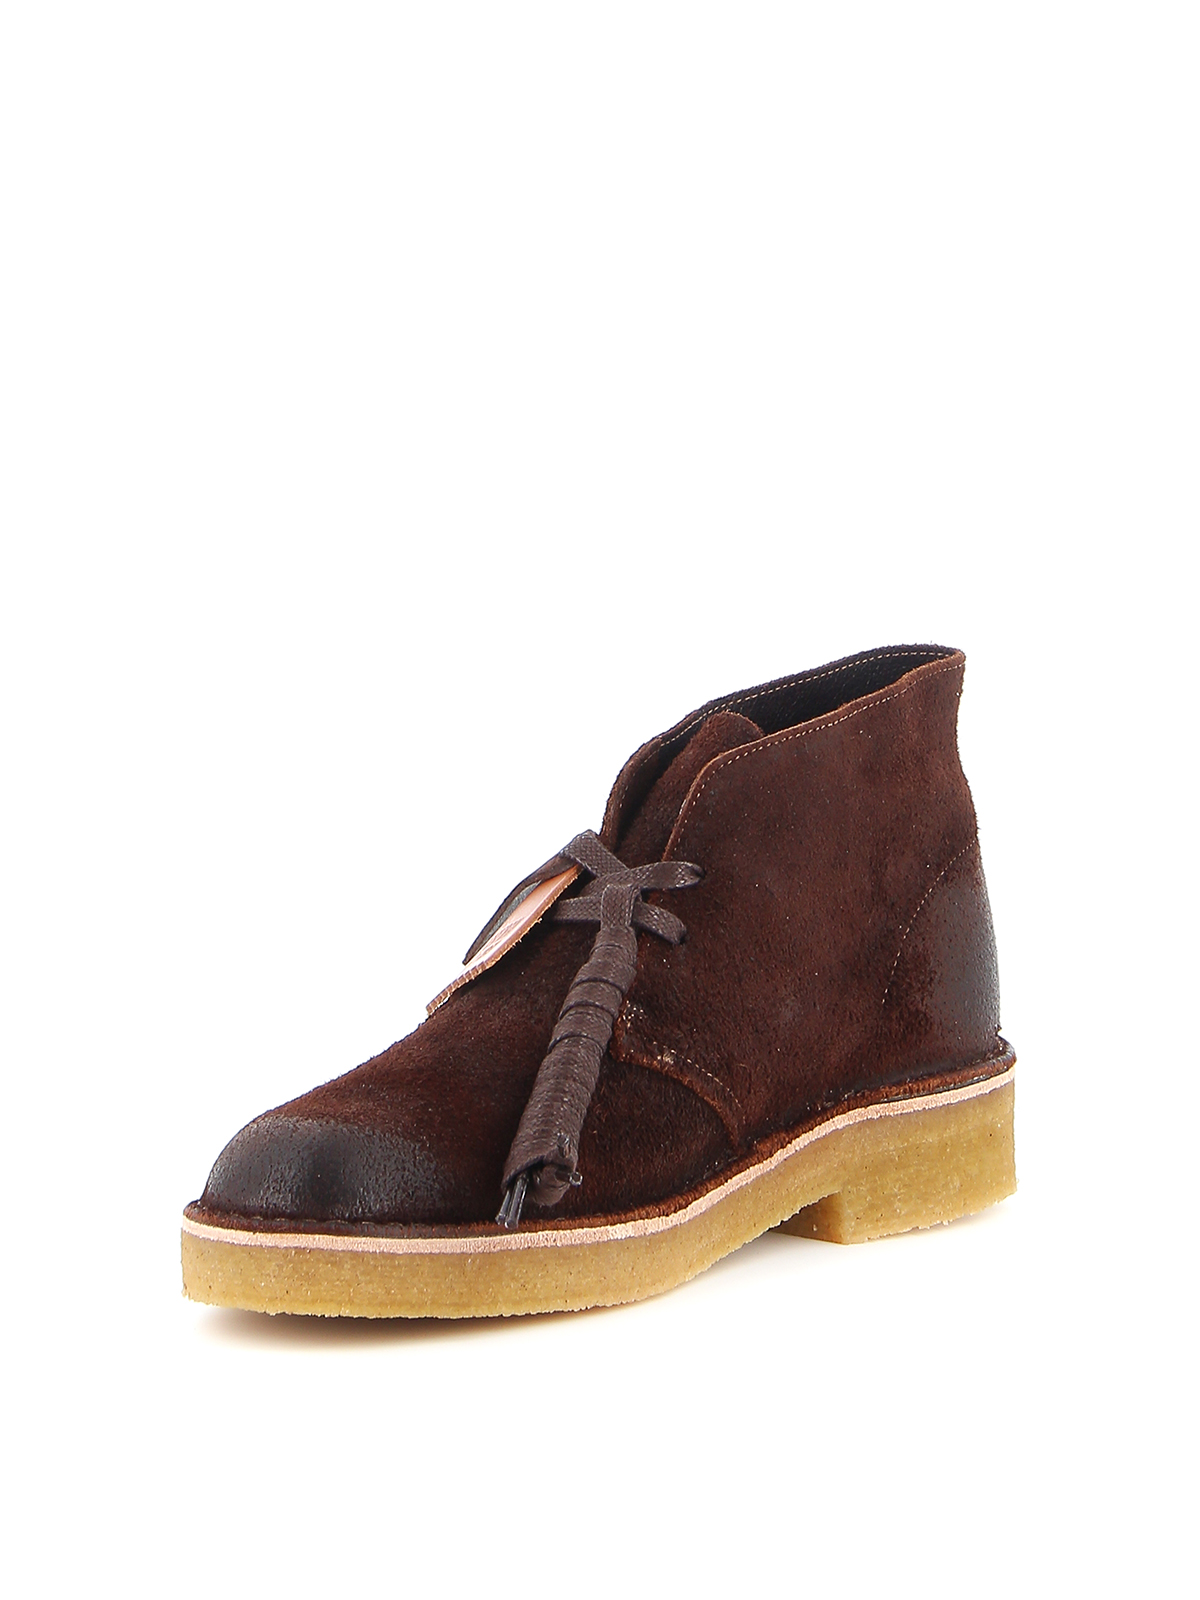 Ankle boots Clarks - Desert Boot 221 shoes -